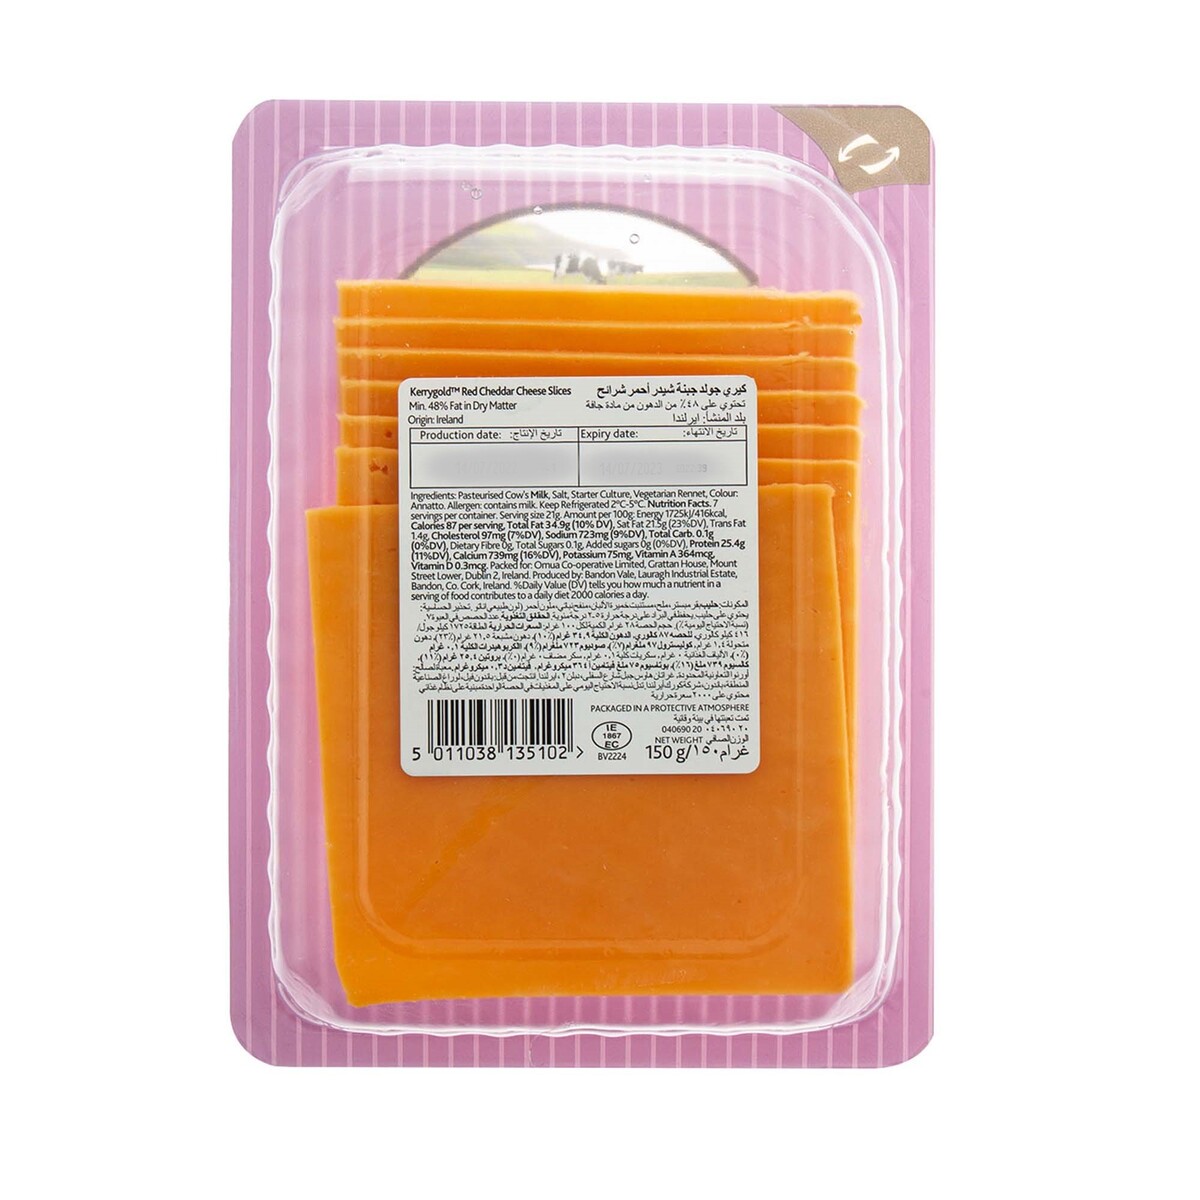 Kerry Gold Red Cheddar Mild Cheese 150 g